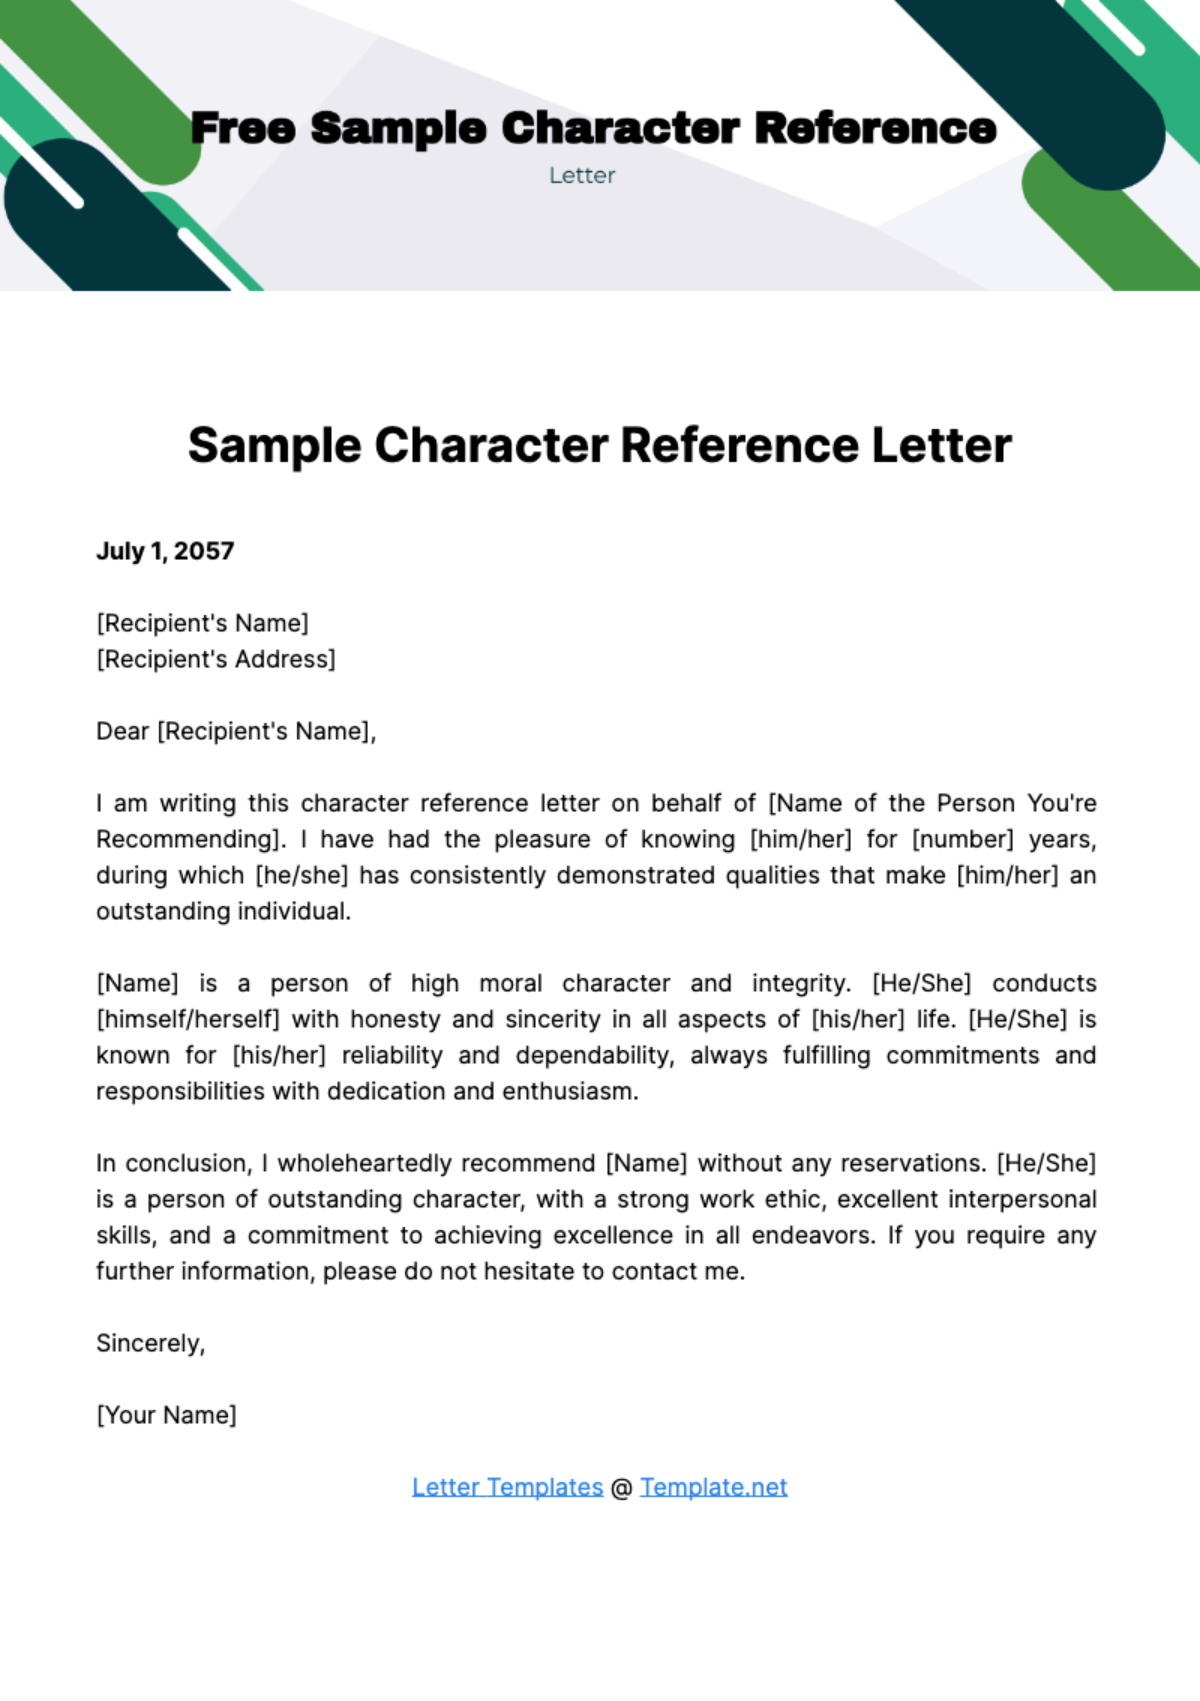 Free Sample Character Reference Letter Template